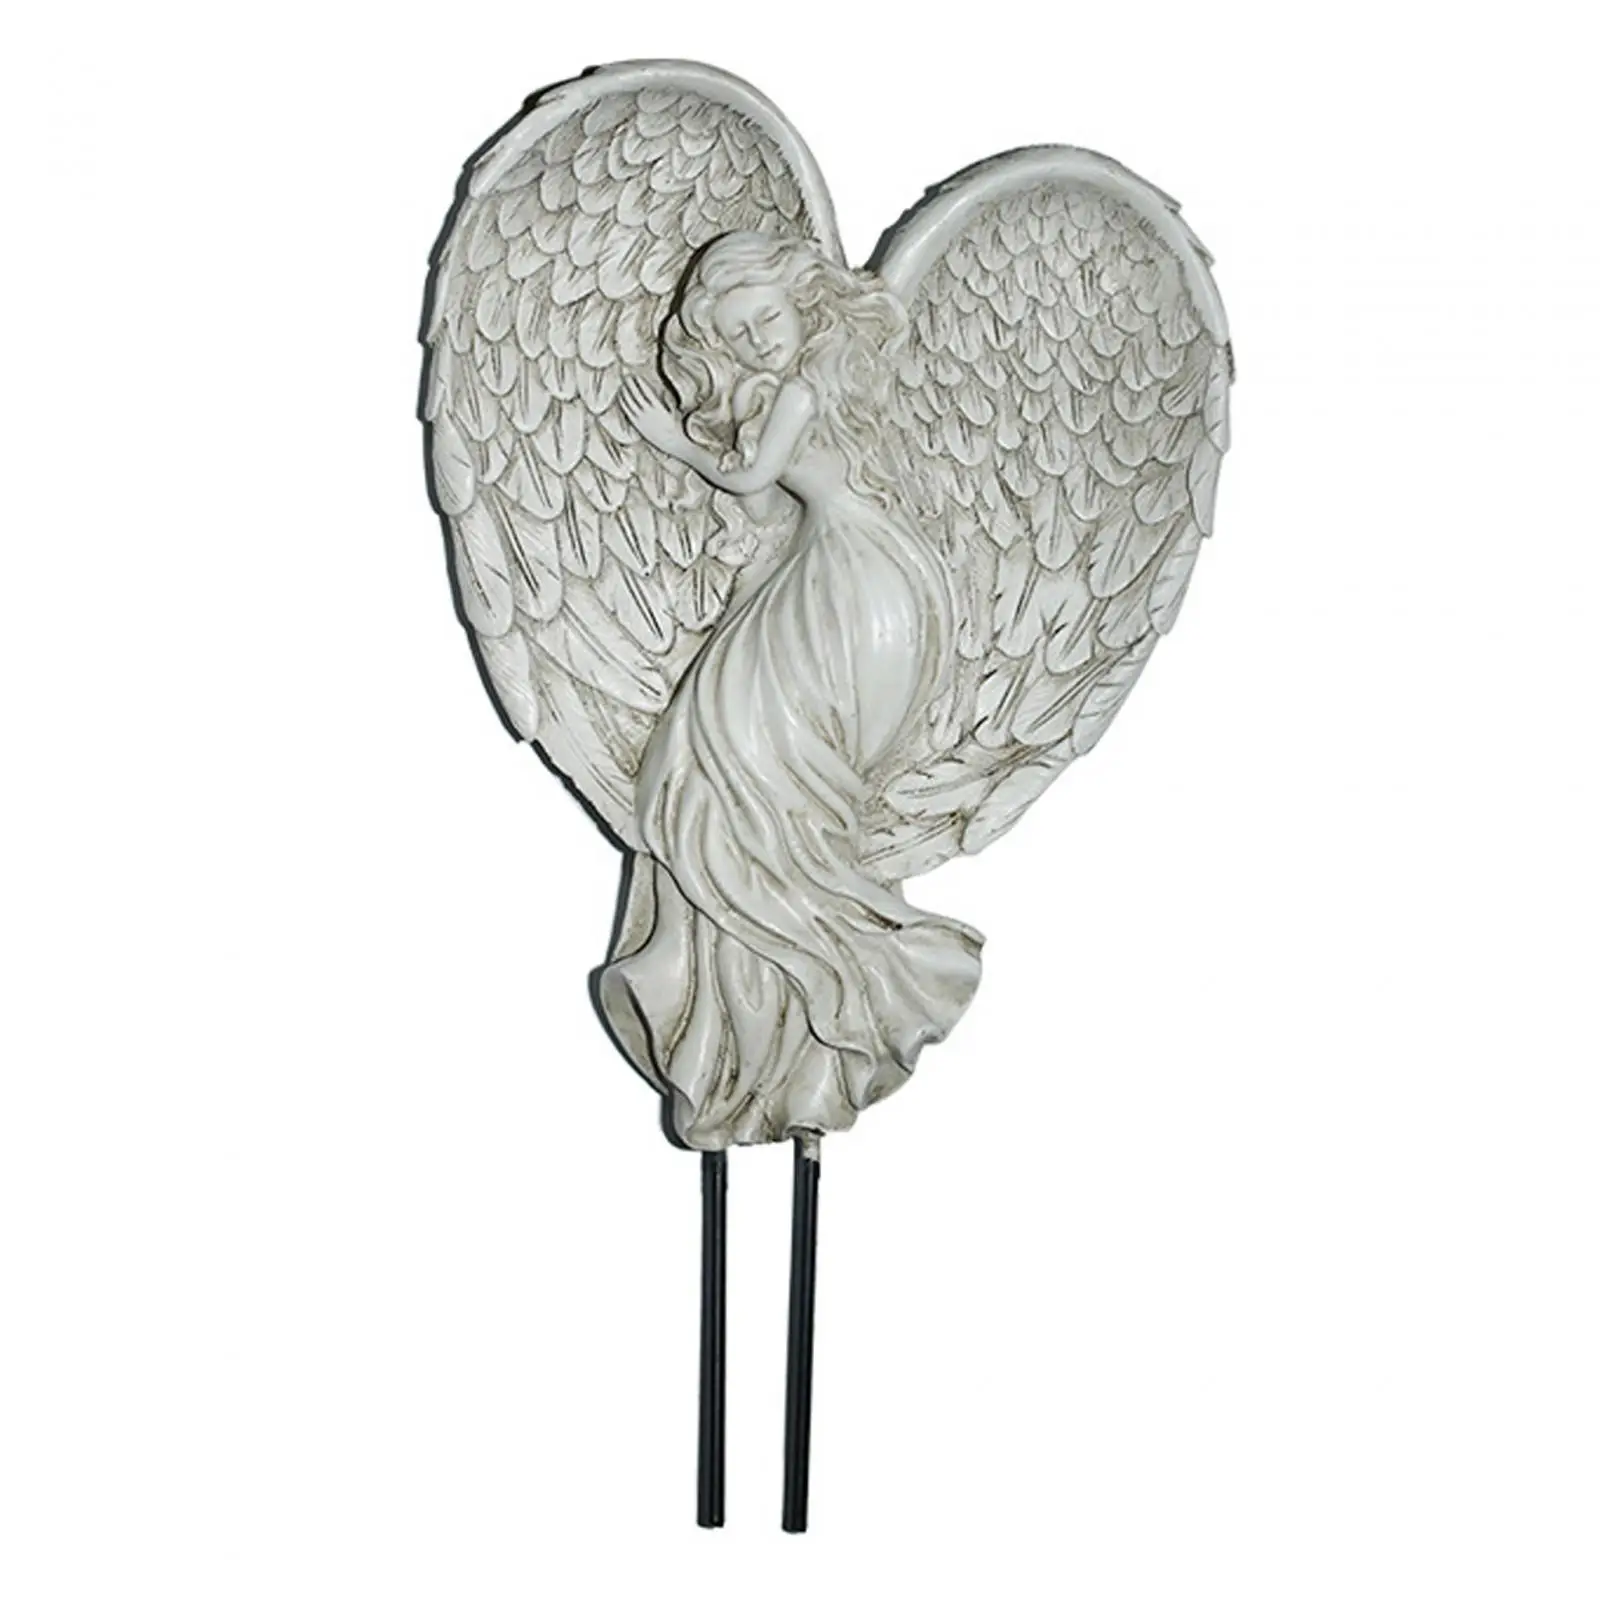 Angel Wings Garden Stake Decorative Plant Stakes for Yard Hallway Flowerpot